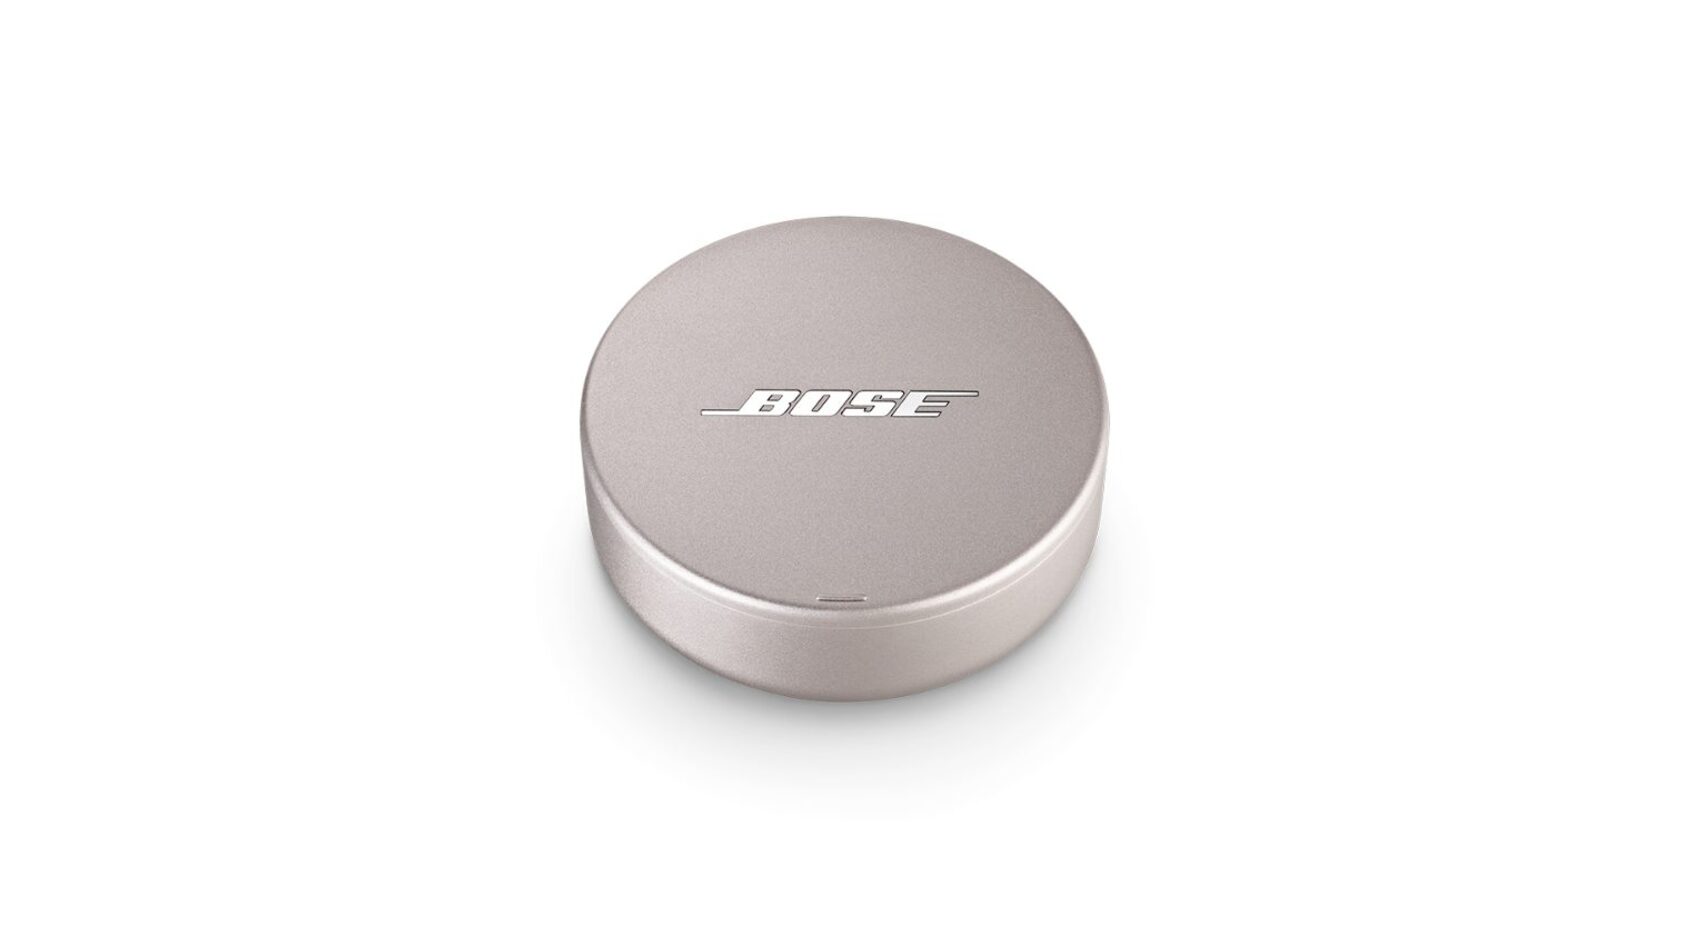 The case for the Bose Sleepbuds II.